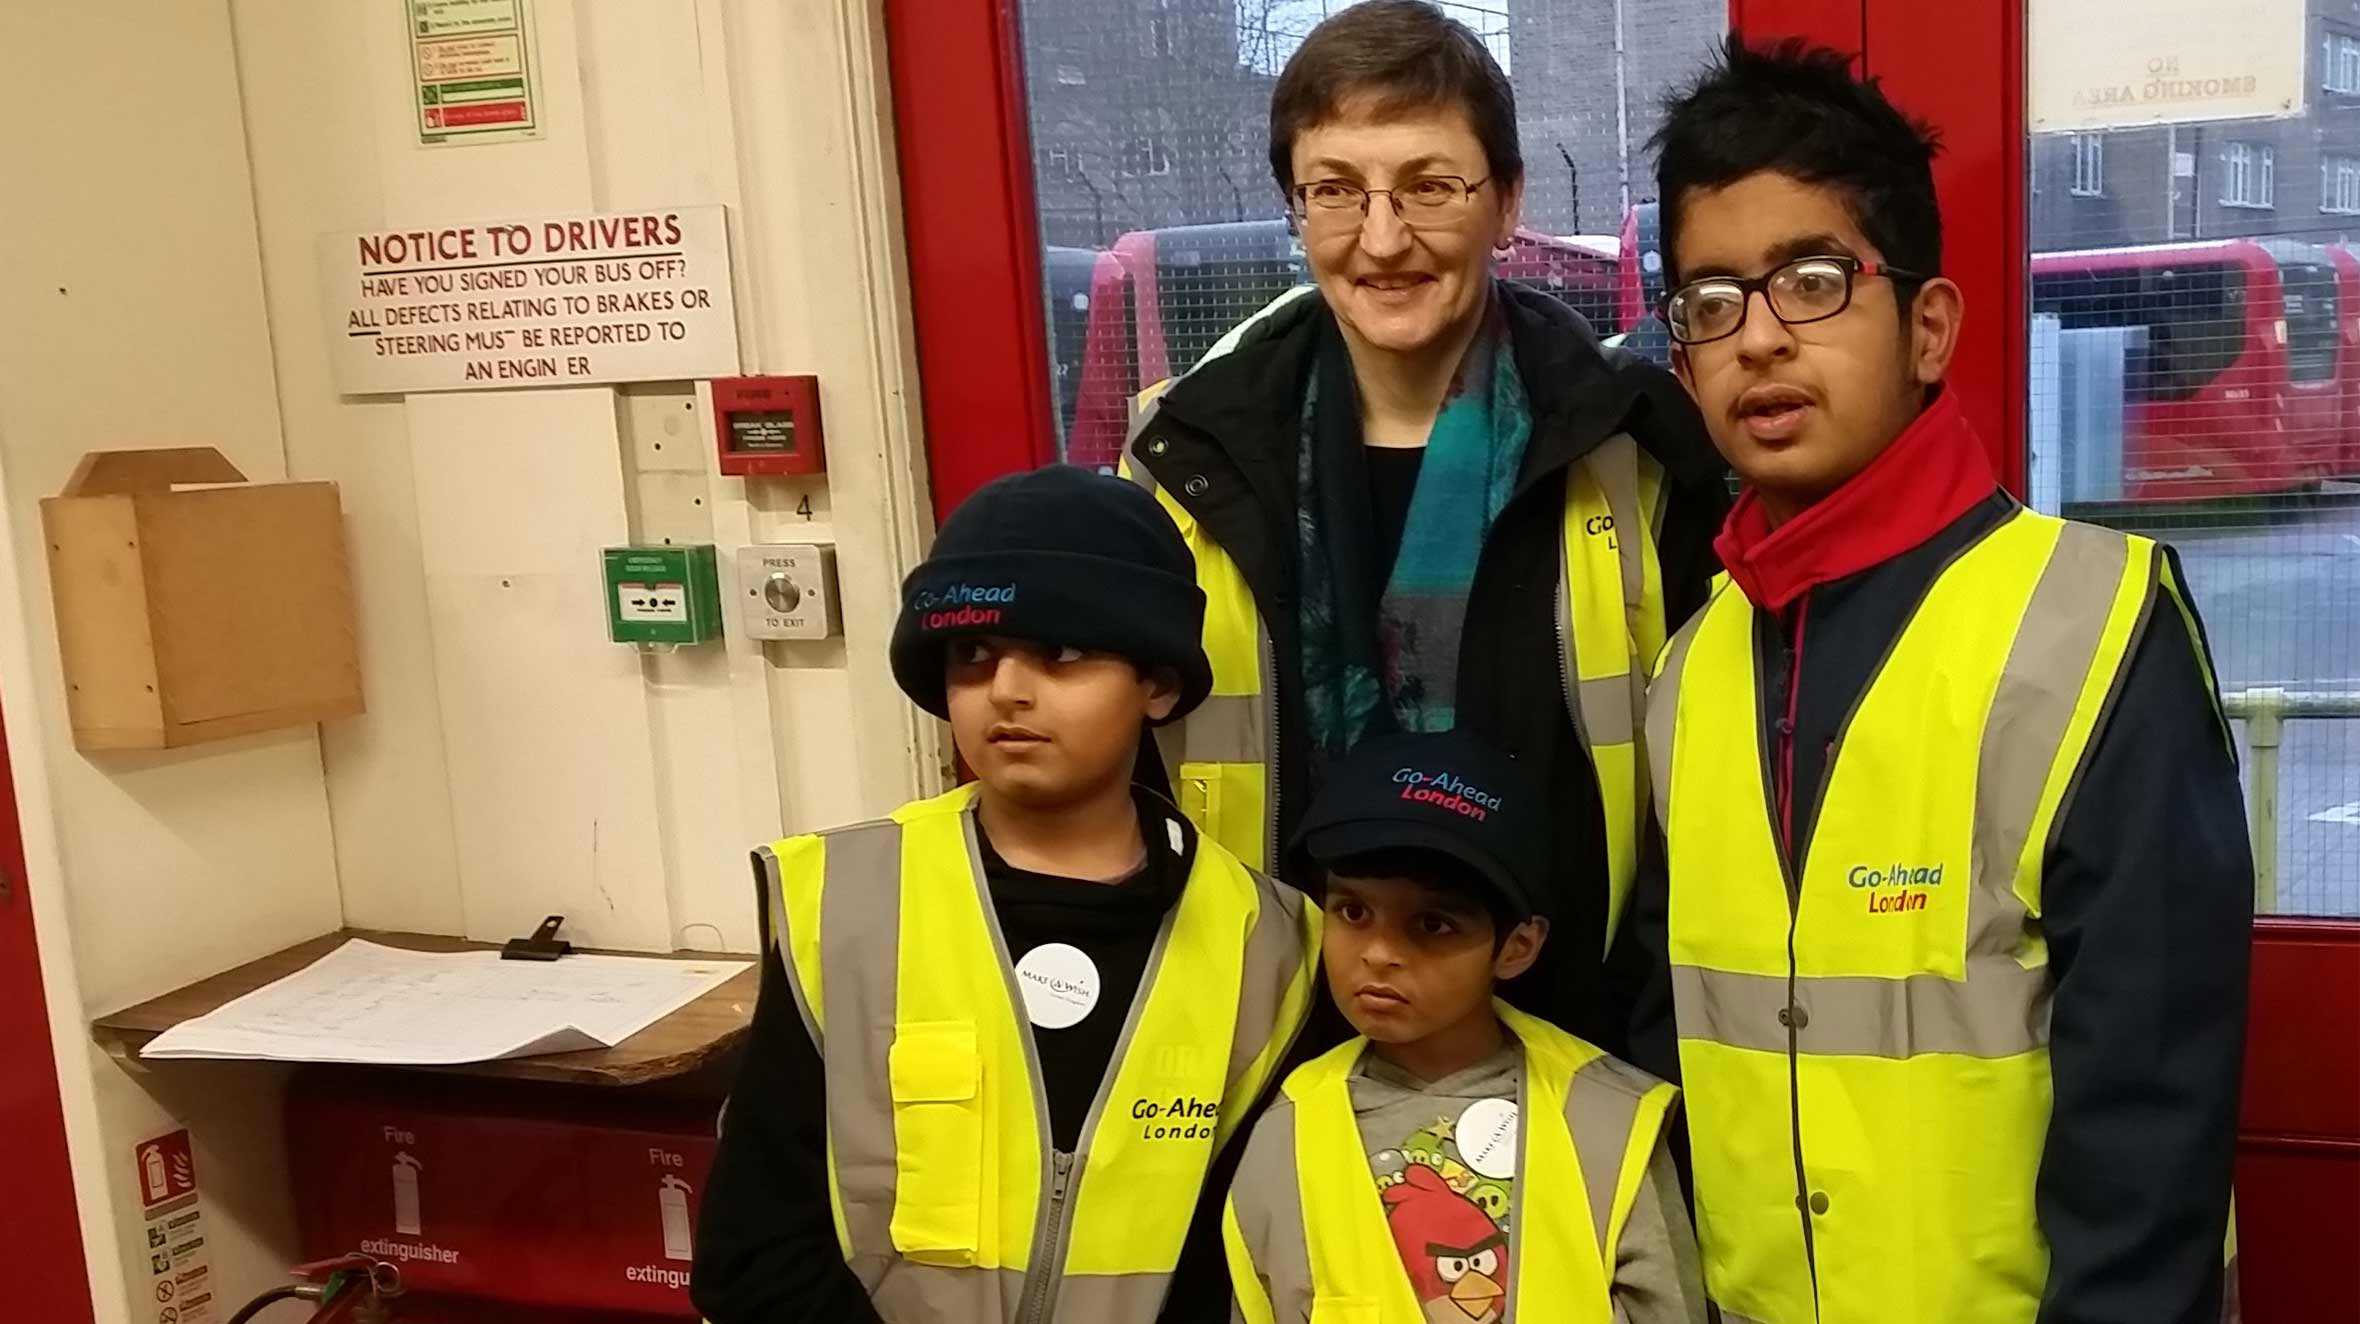 Krish and his brothers wearing high visibility jackets at the bus station.